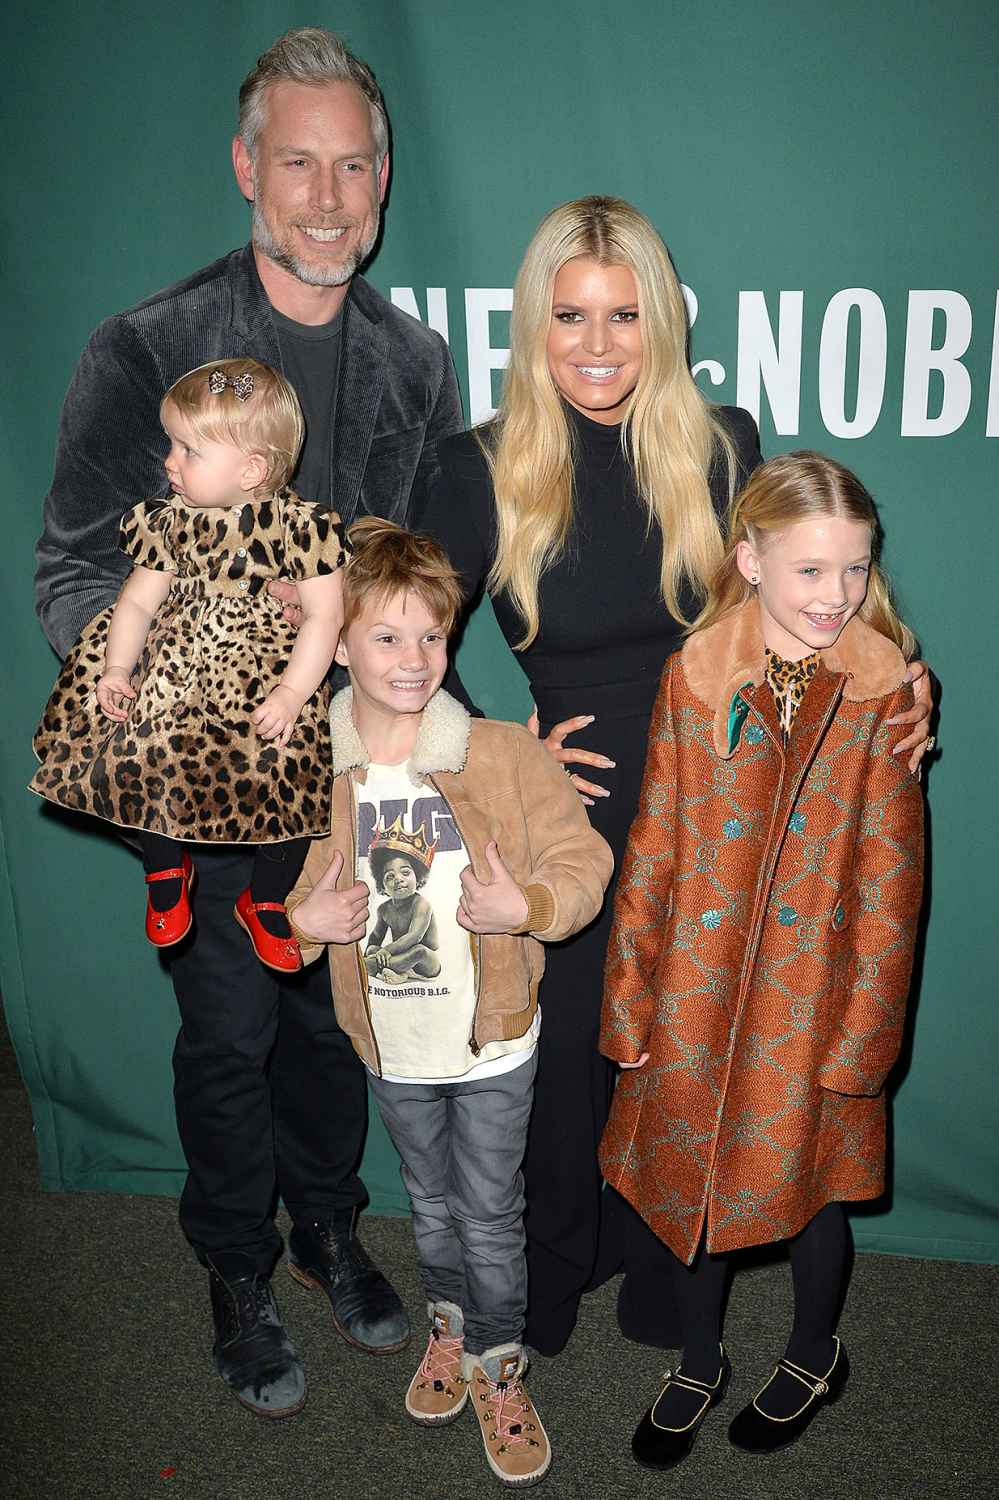 Jessica Simpson Wants to Be a Role Model for Daughters About Body Image